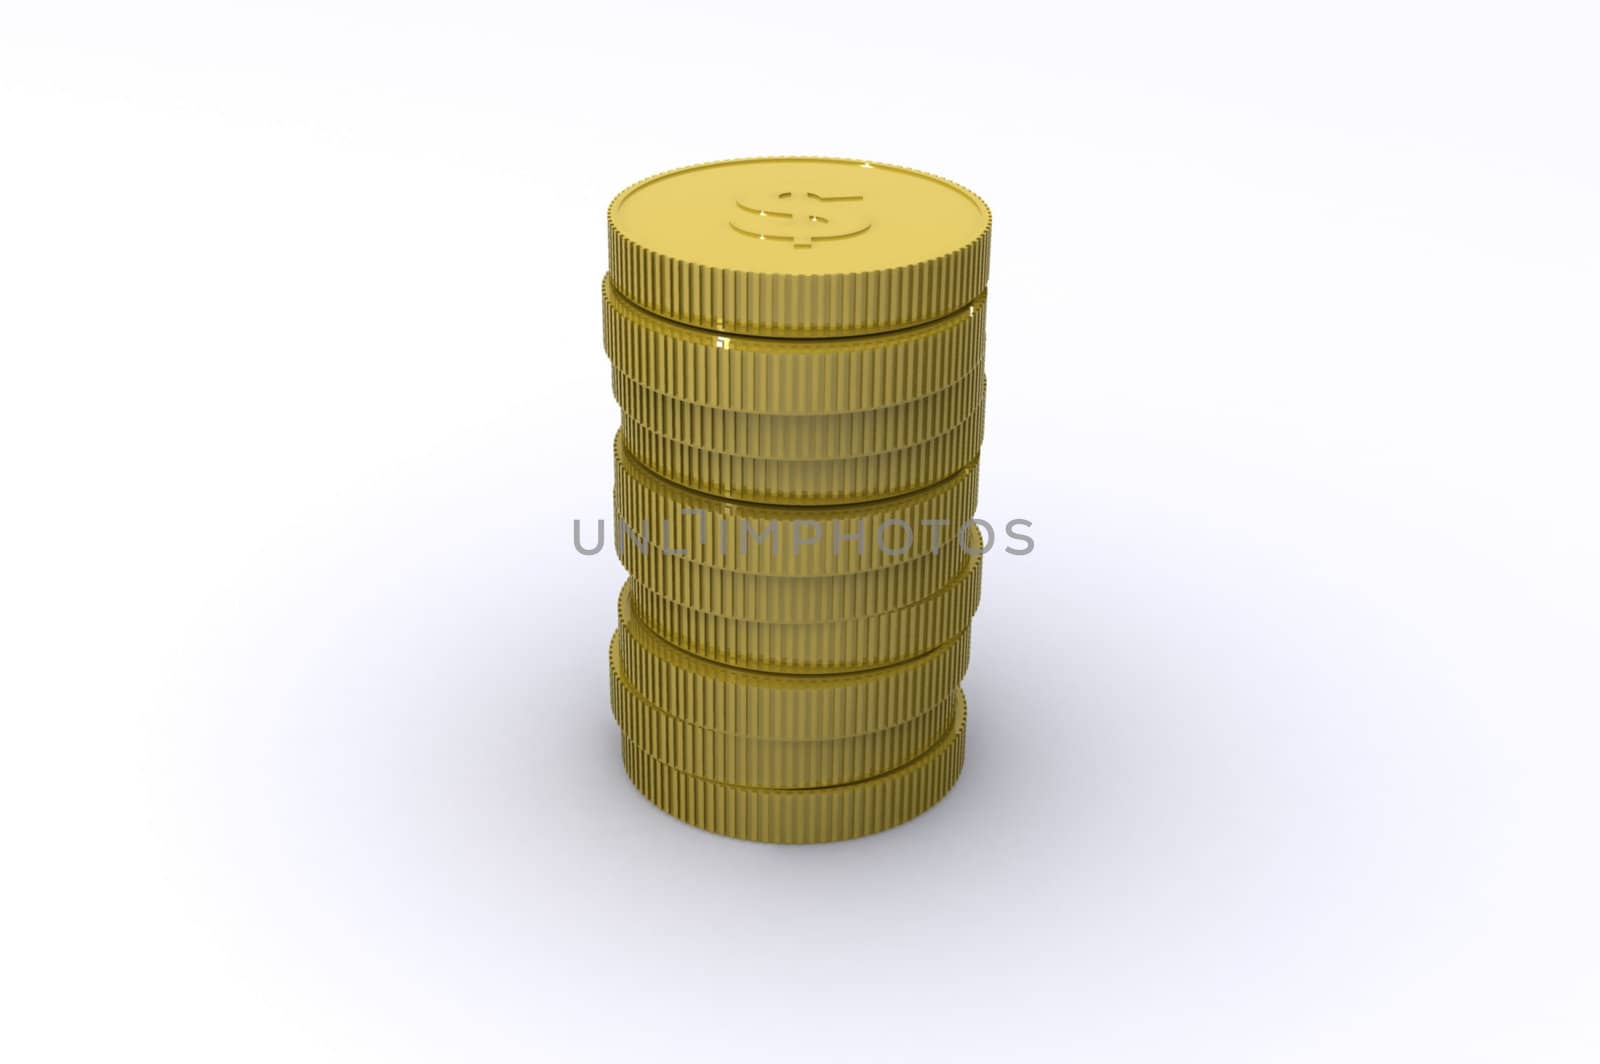 A Colourful 3d Rendered Stack of Cents Illustration